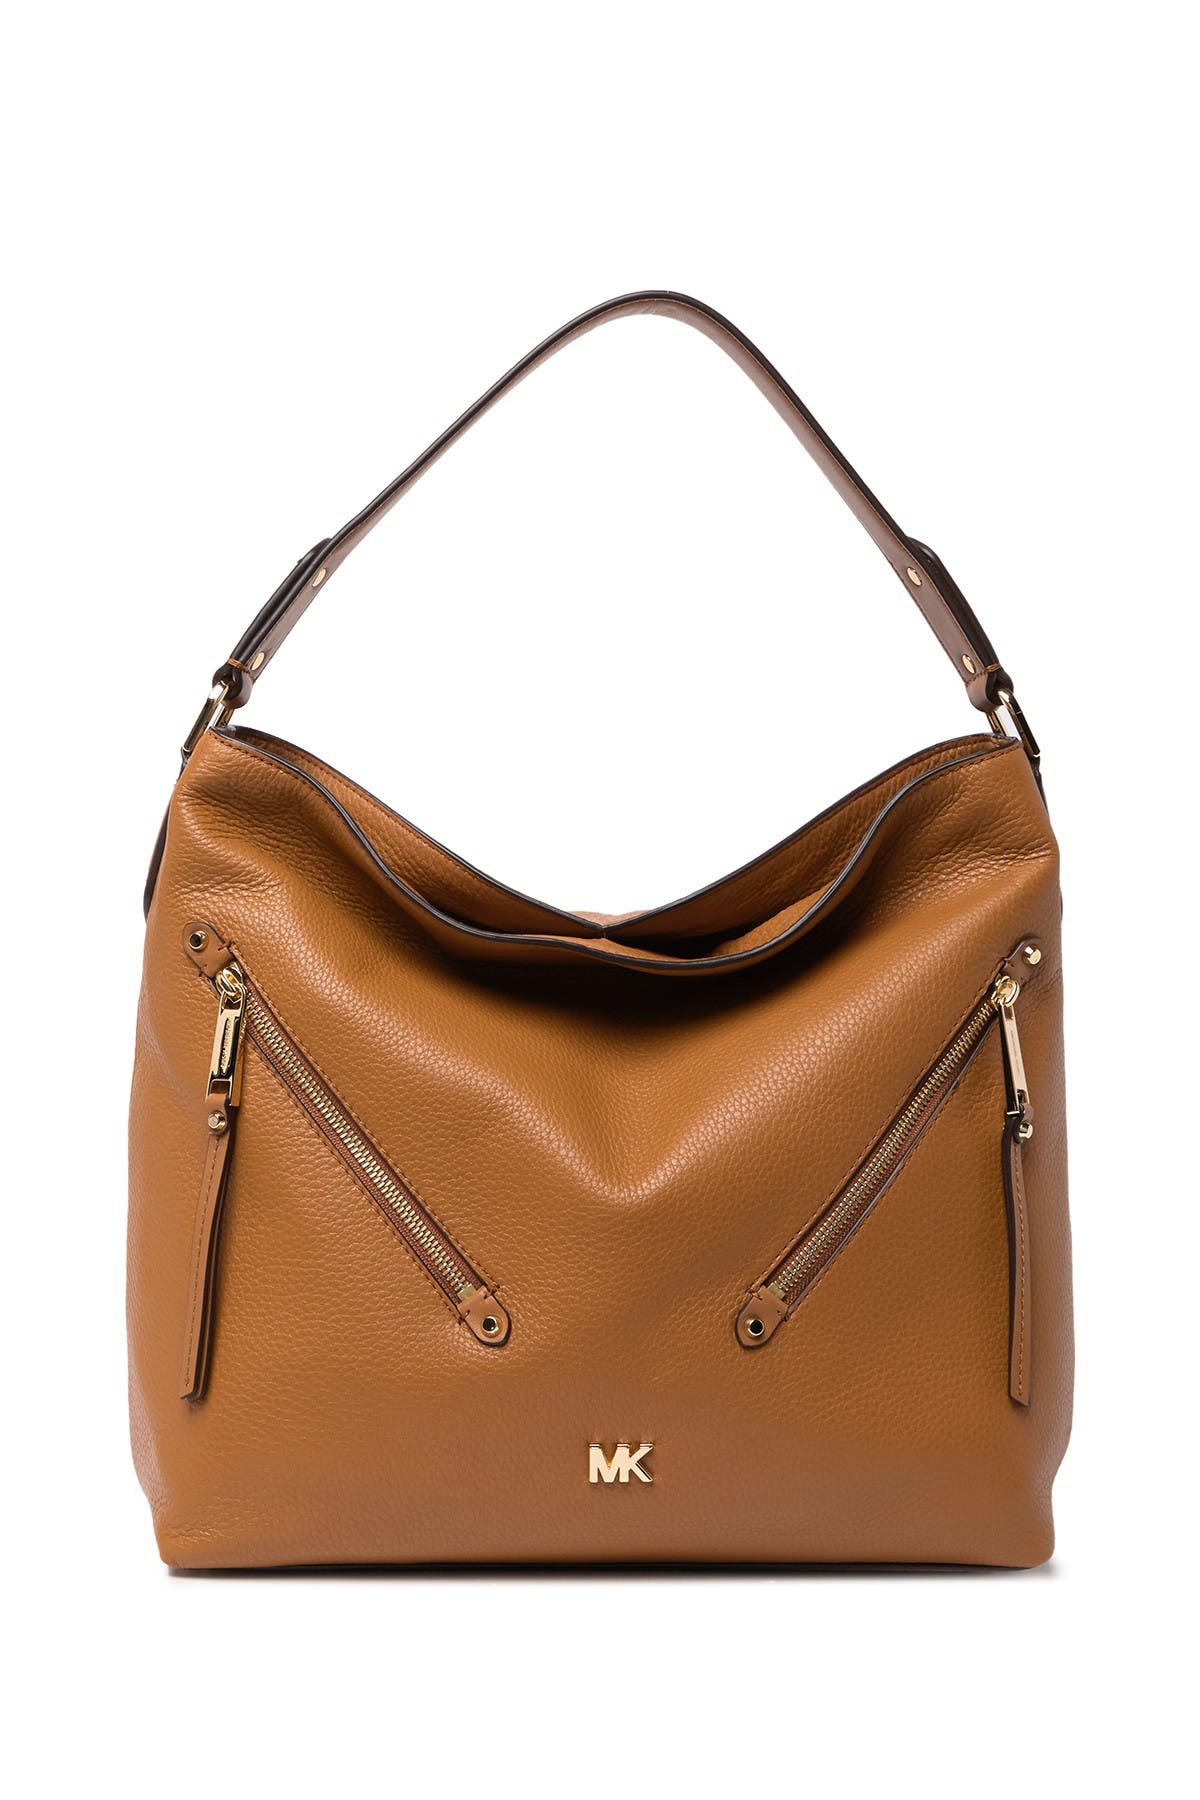 Evie Large Pebbled Leather Hobo Bag 